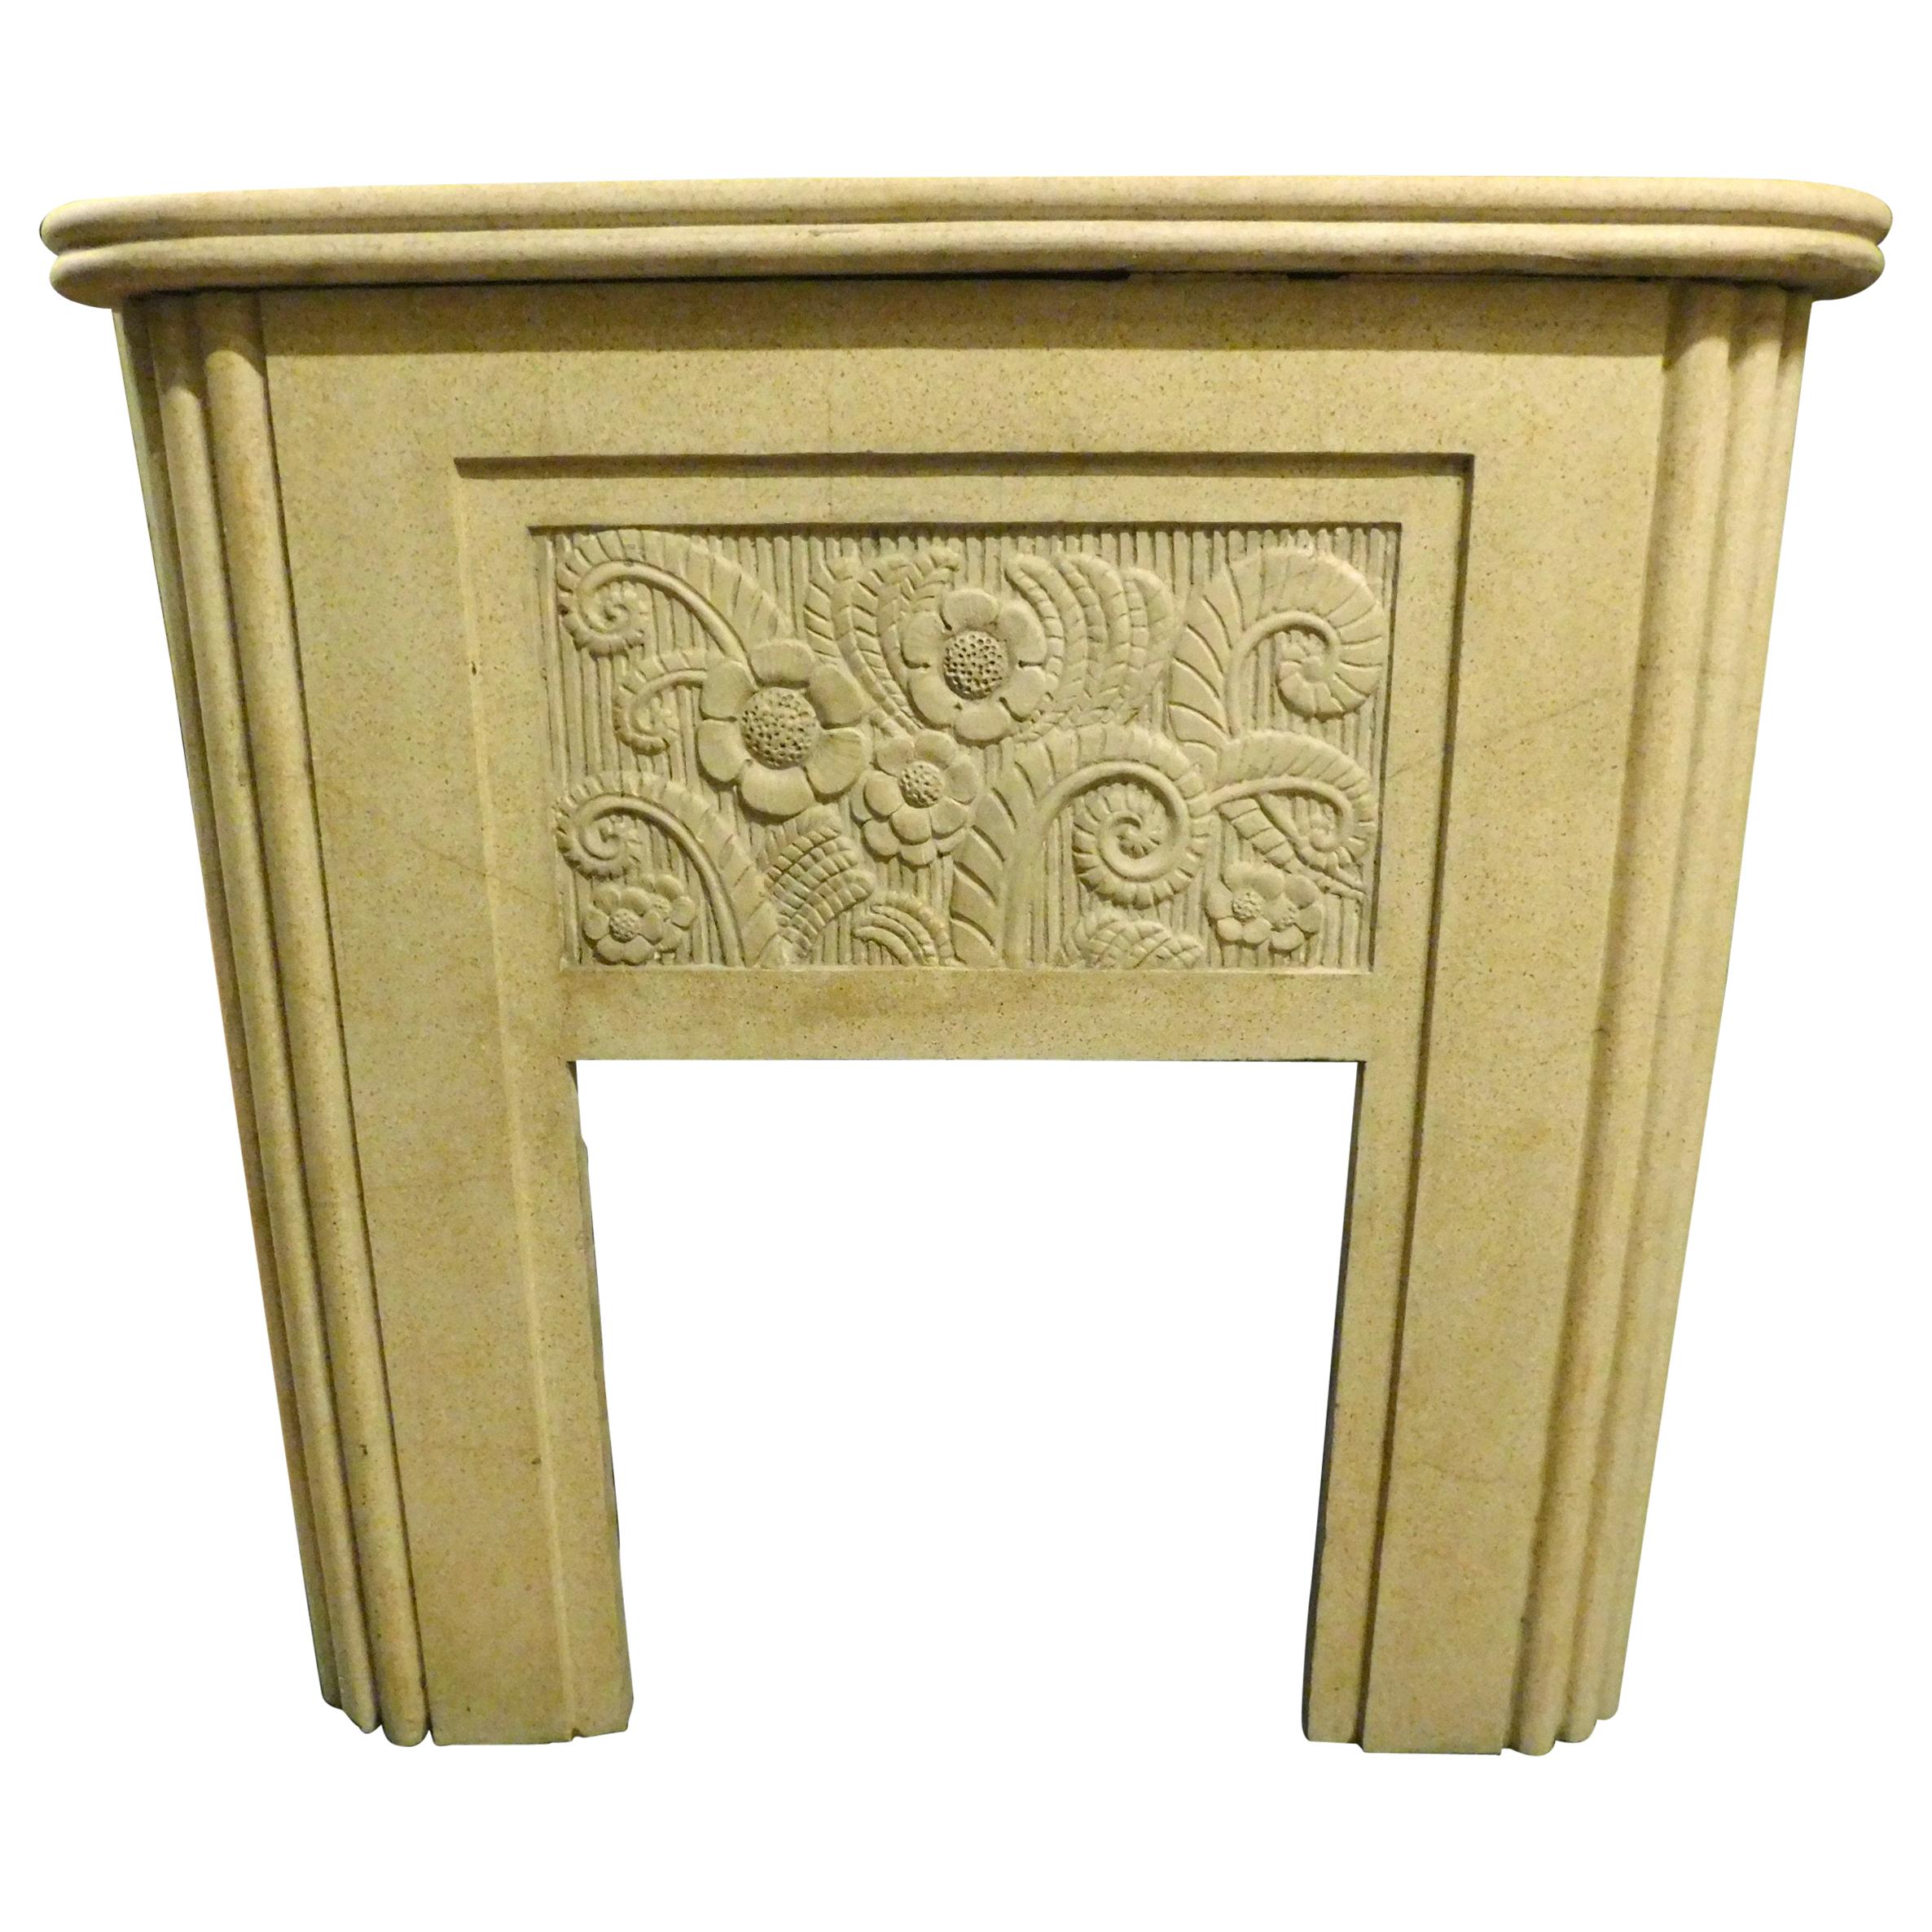 Vintage Fireplace in White Grit, Deco Style, 20th Century